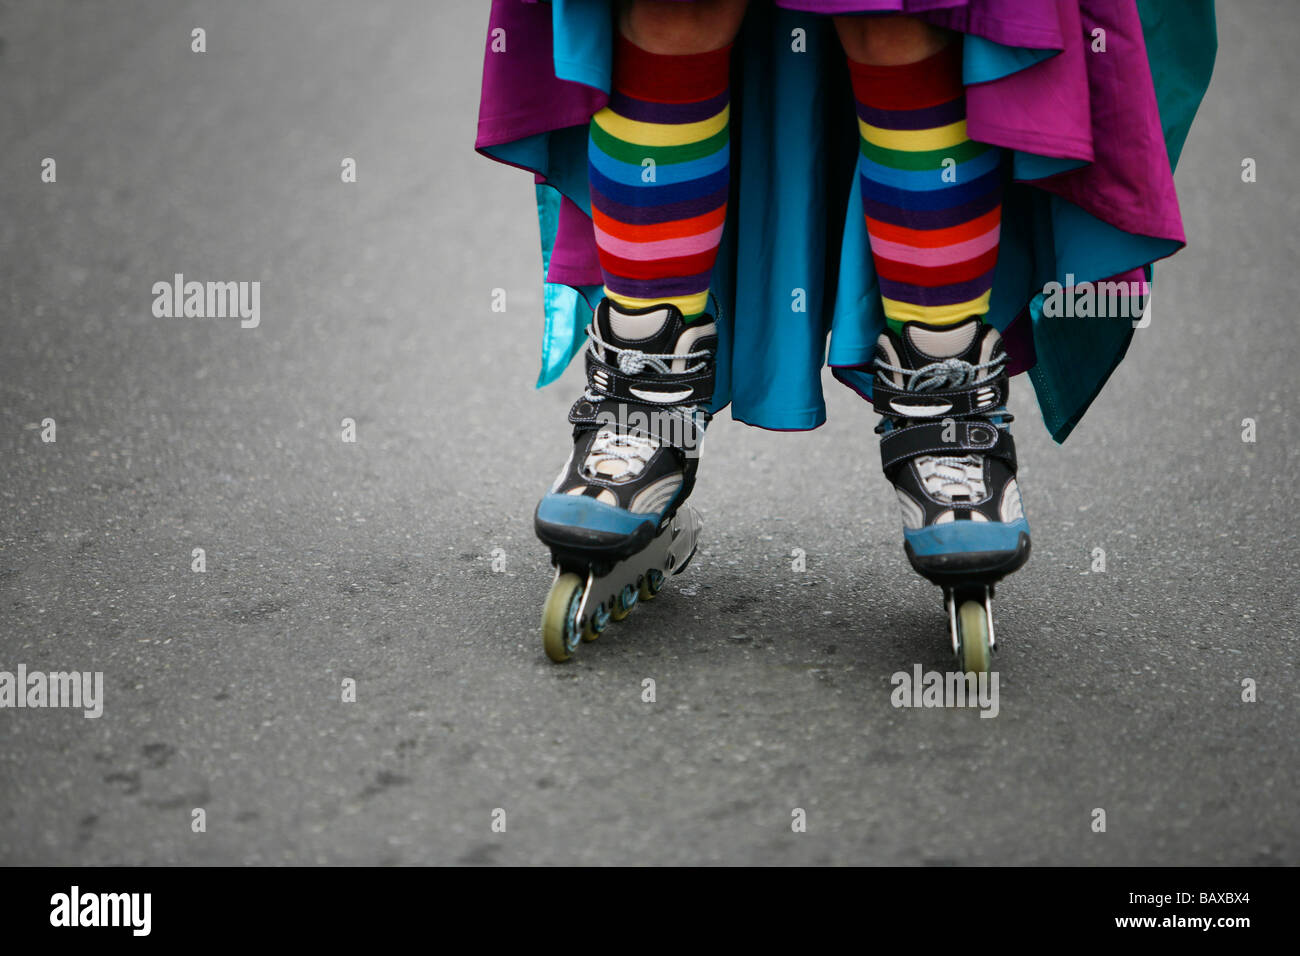 A women roller blades in rainbow colored stockings. Stock Photo